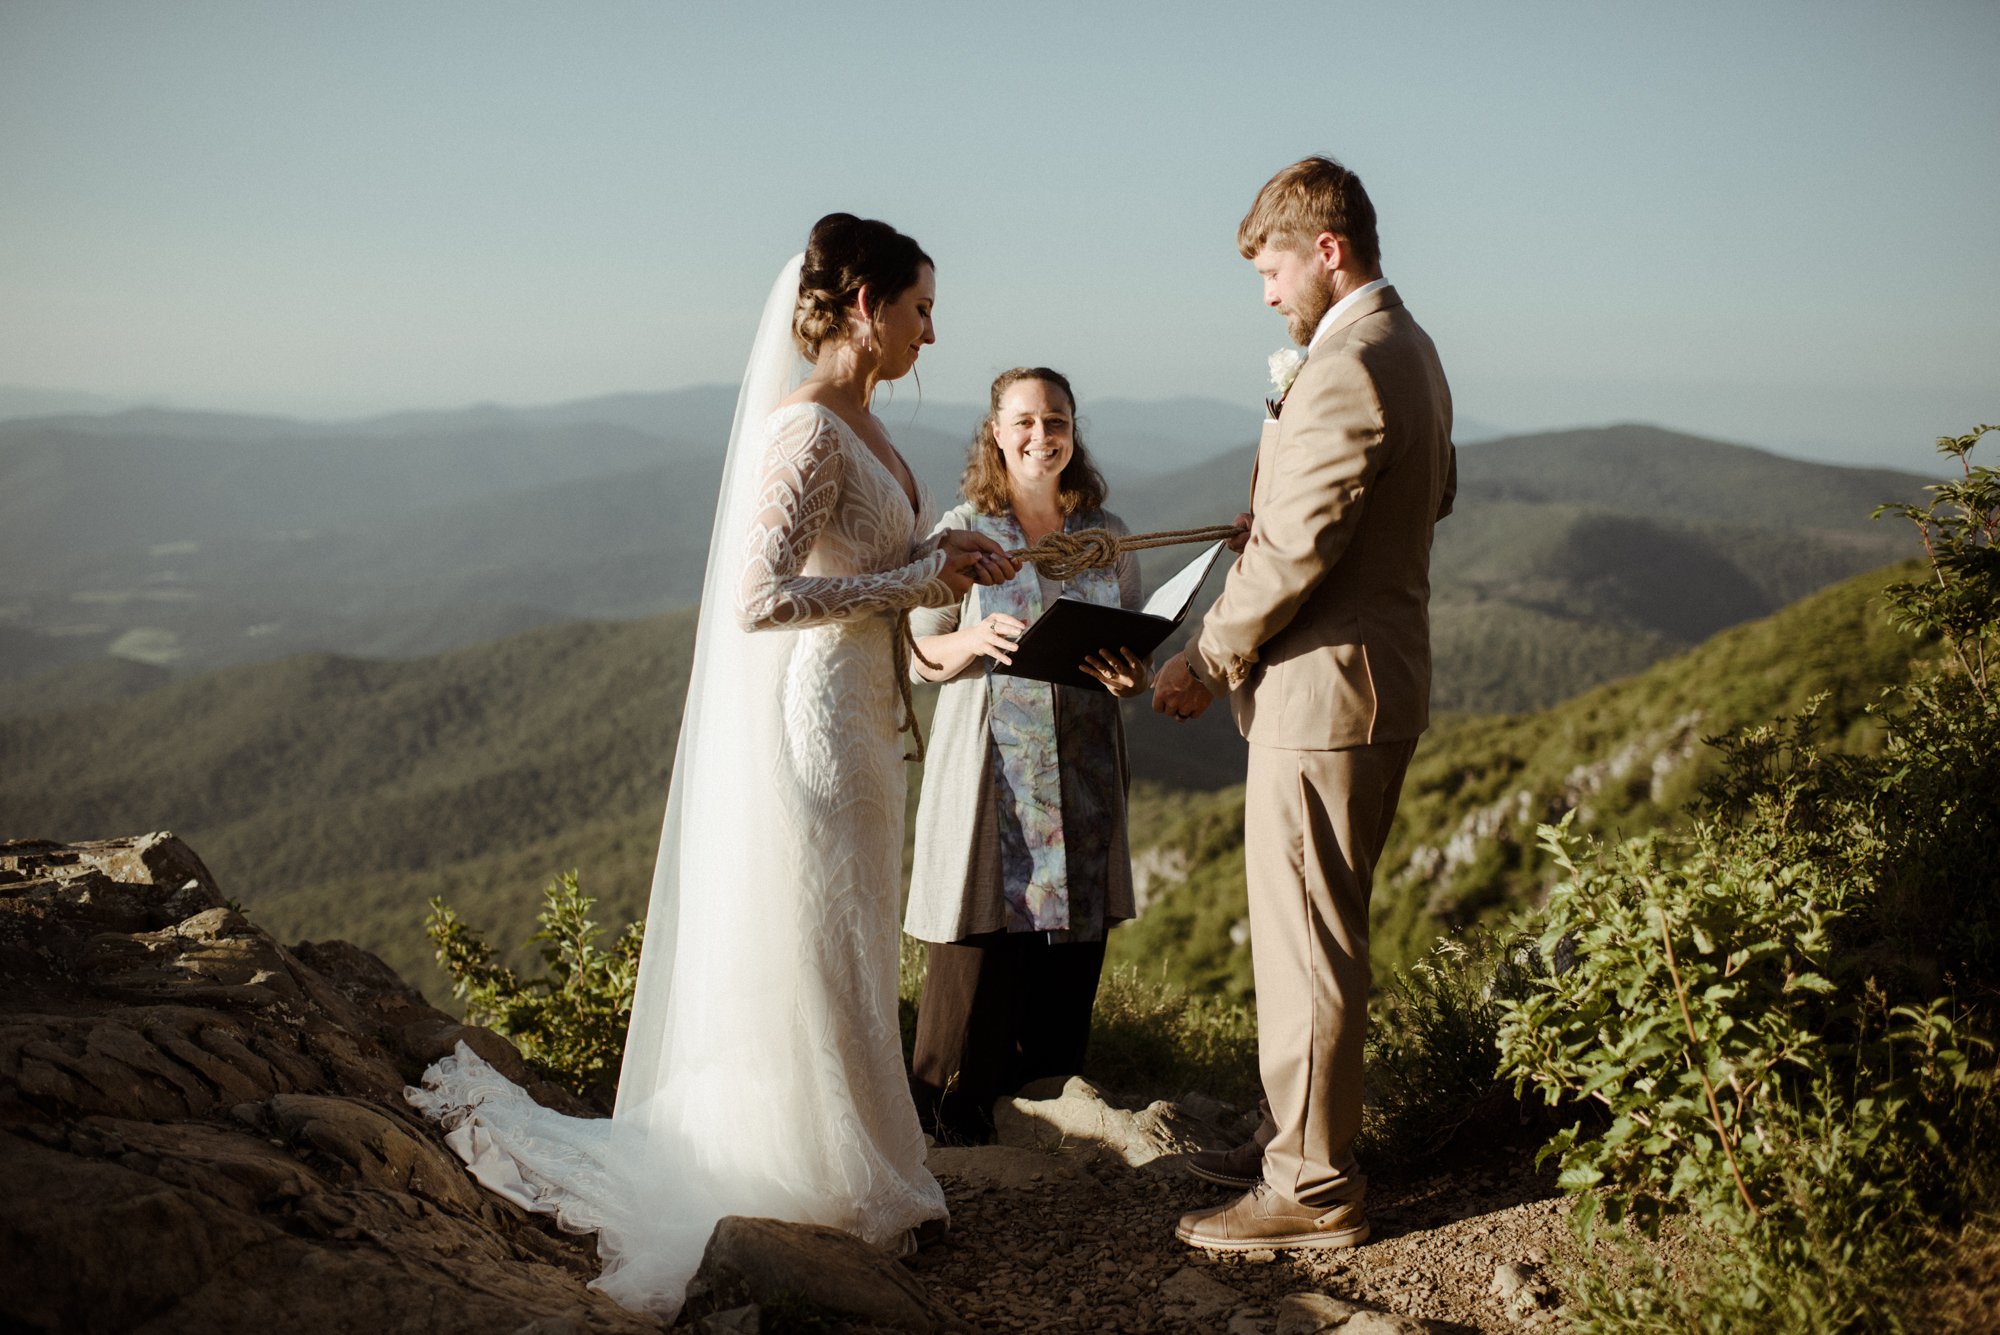 Sunset Elopement on Stony Man Summit in Shenandoah National Park - White Sails Creative Elopement Photography - July Elopement on the Blue Ridge Parkway_32.jpg